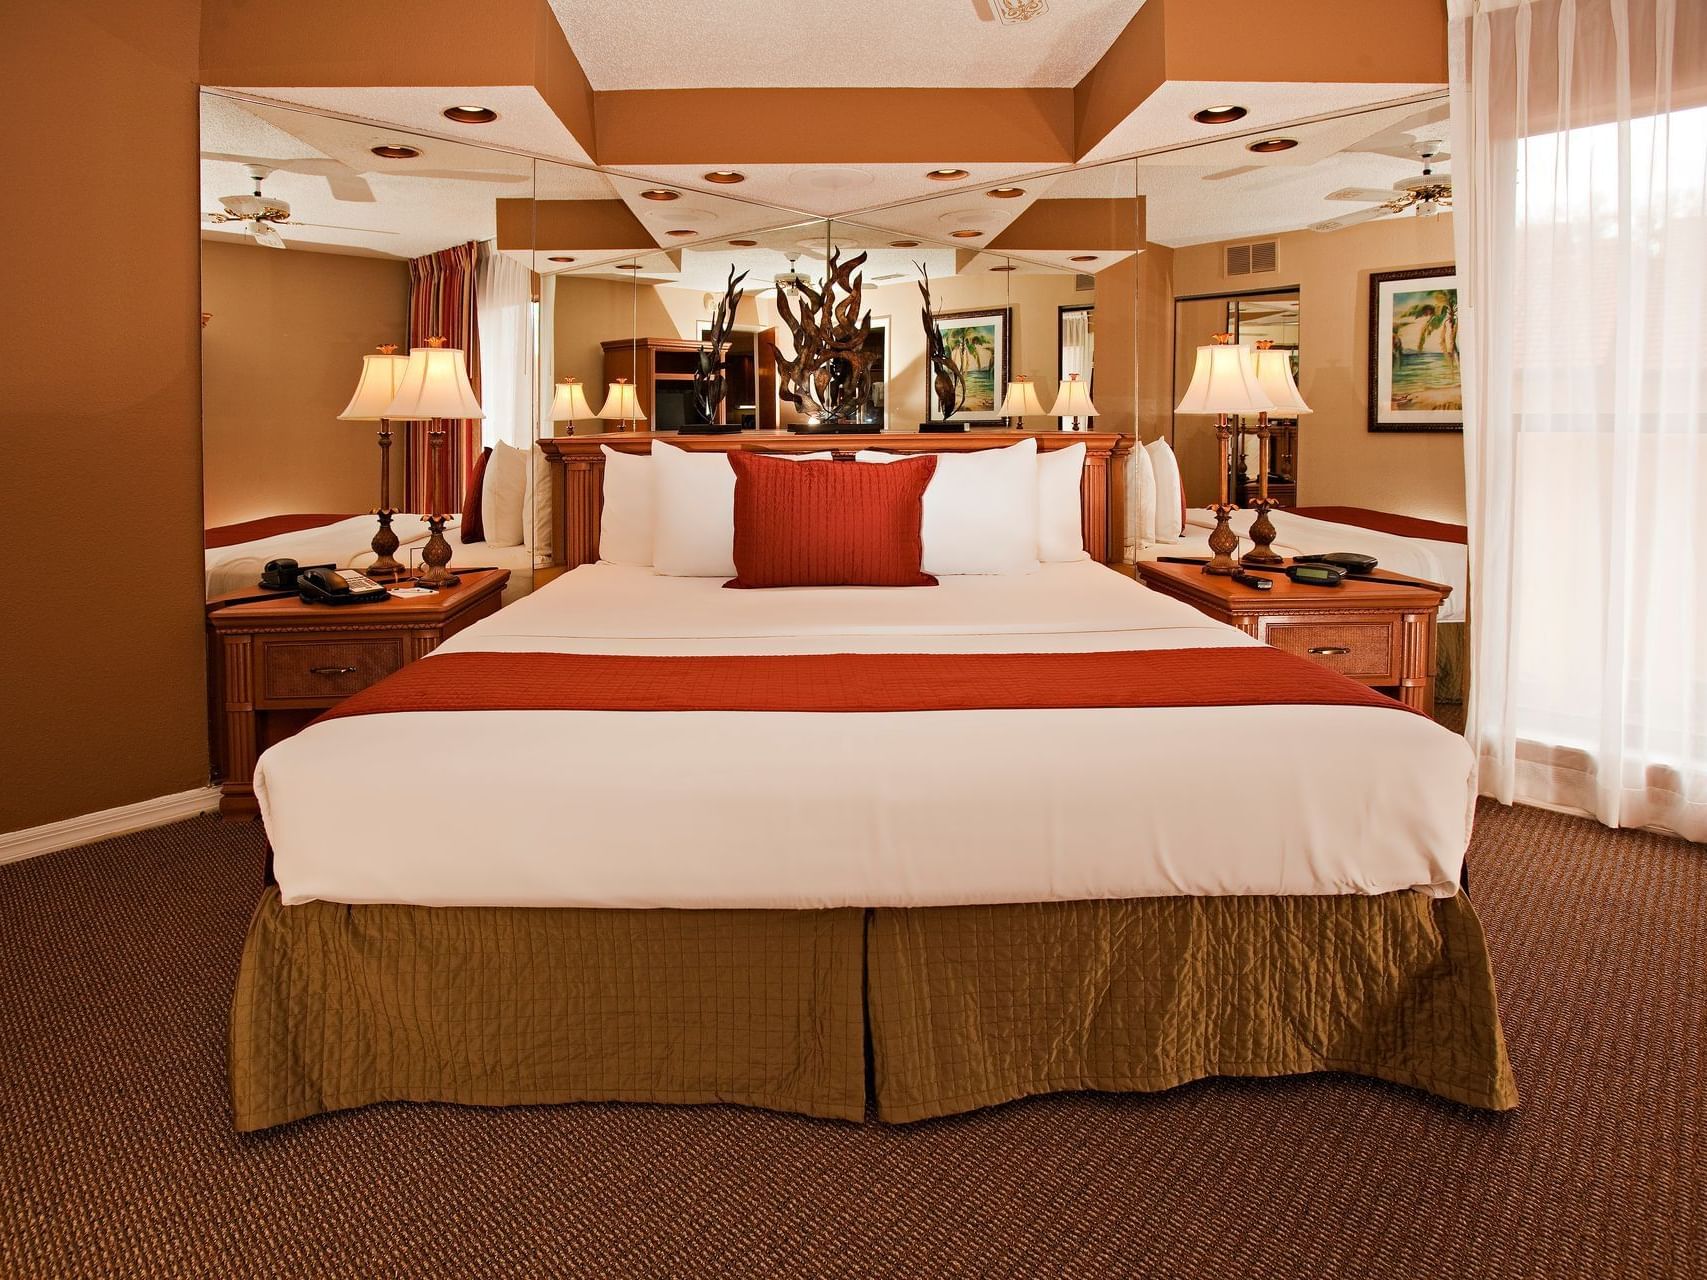 Large bed, One bedroom deluxe suite at Legacy Vacation Resorts